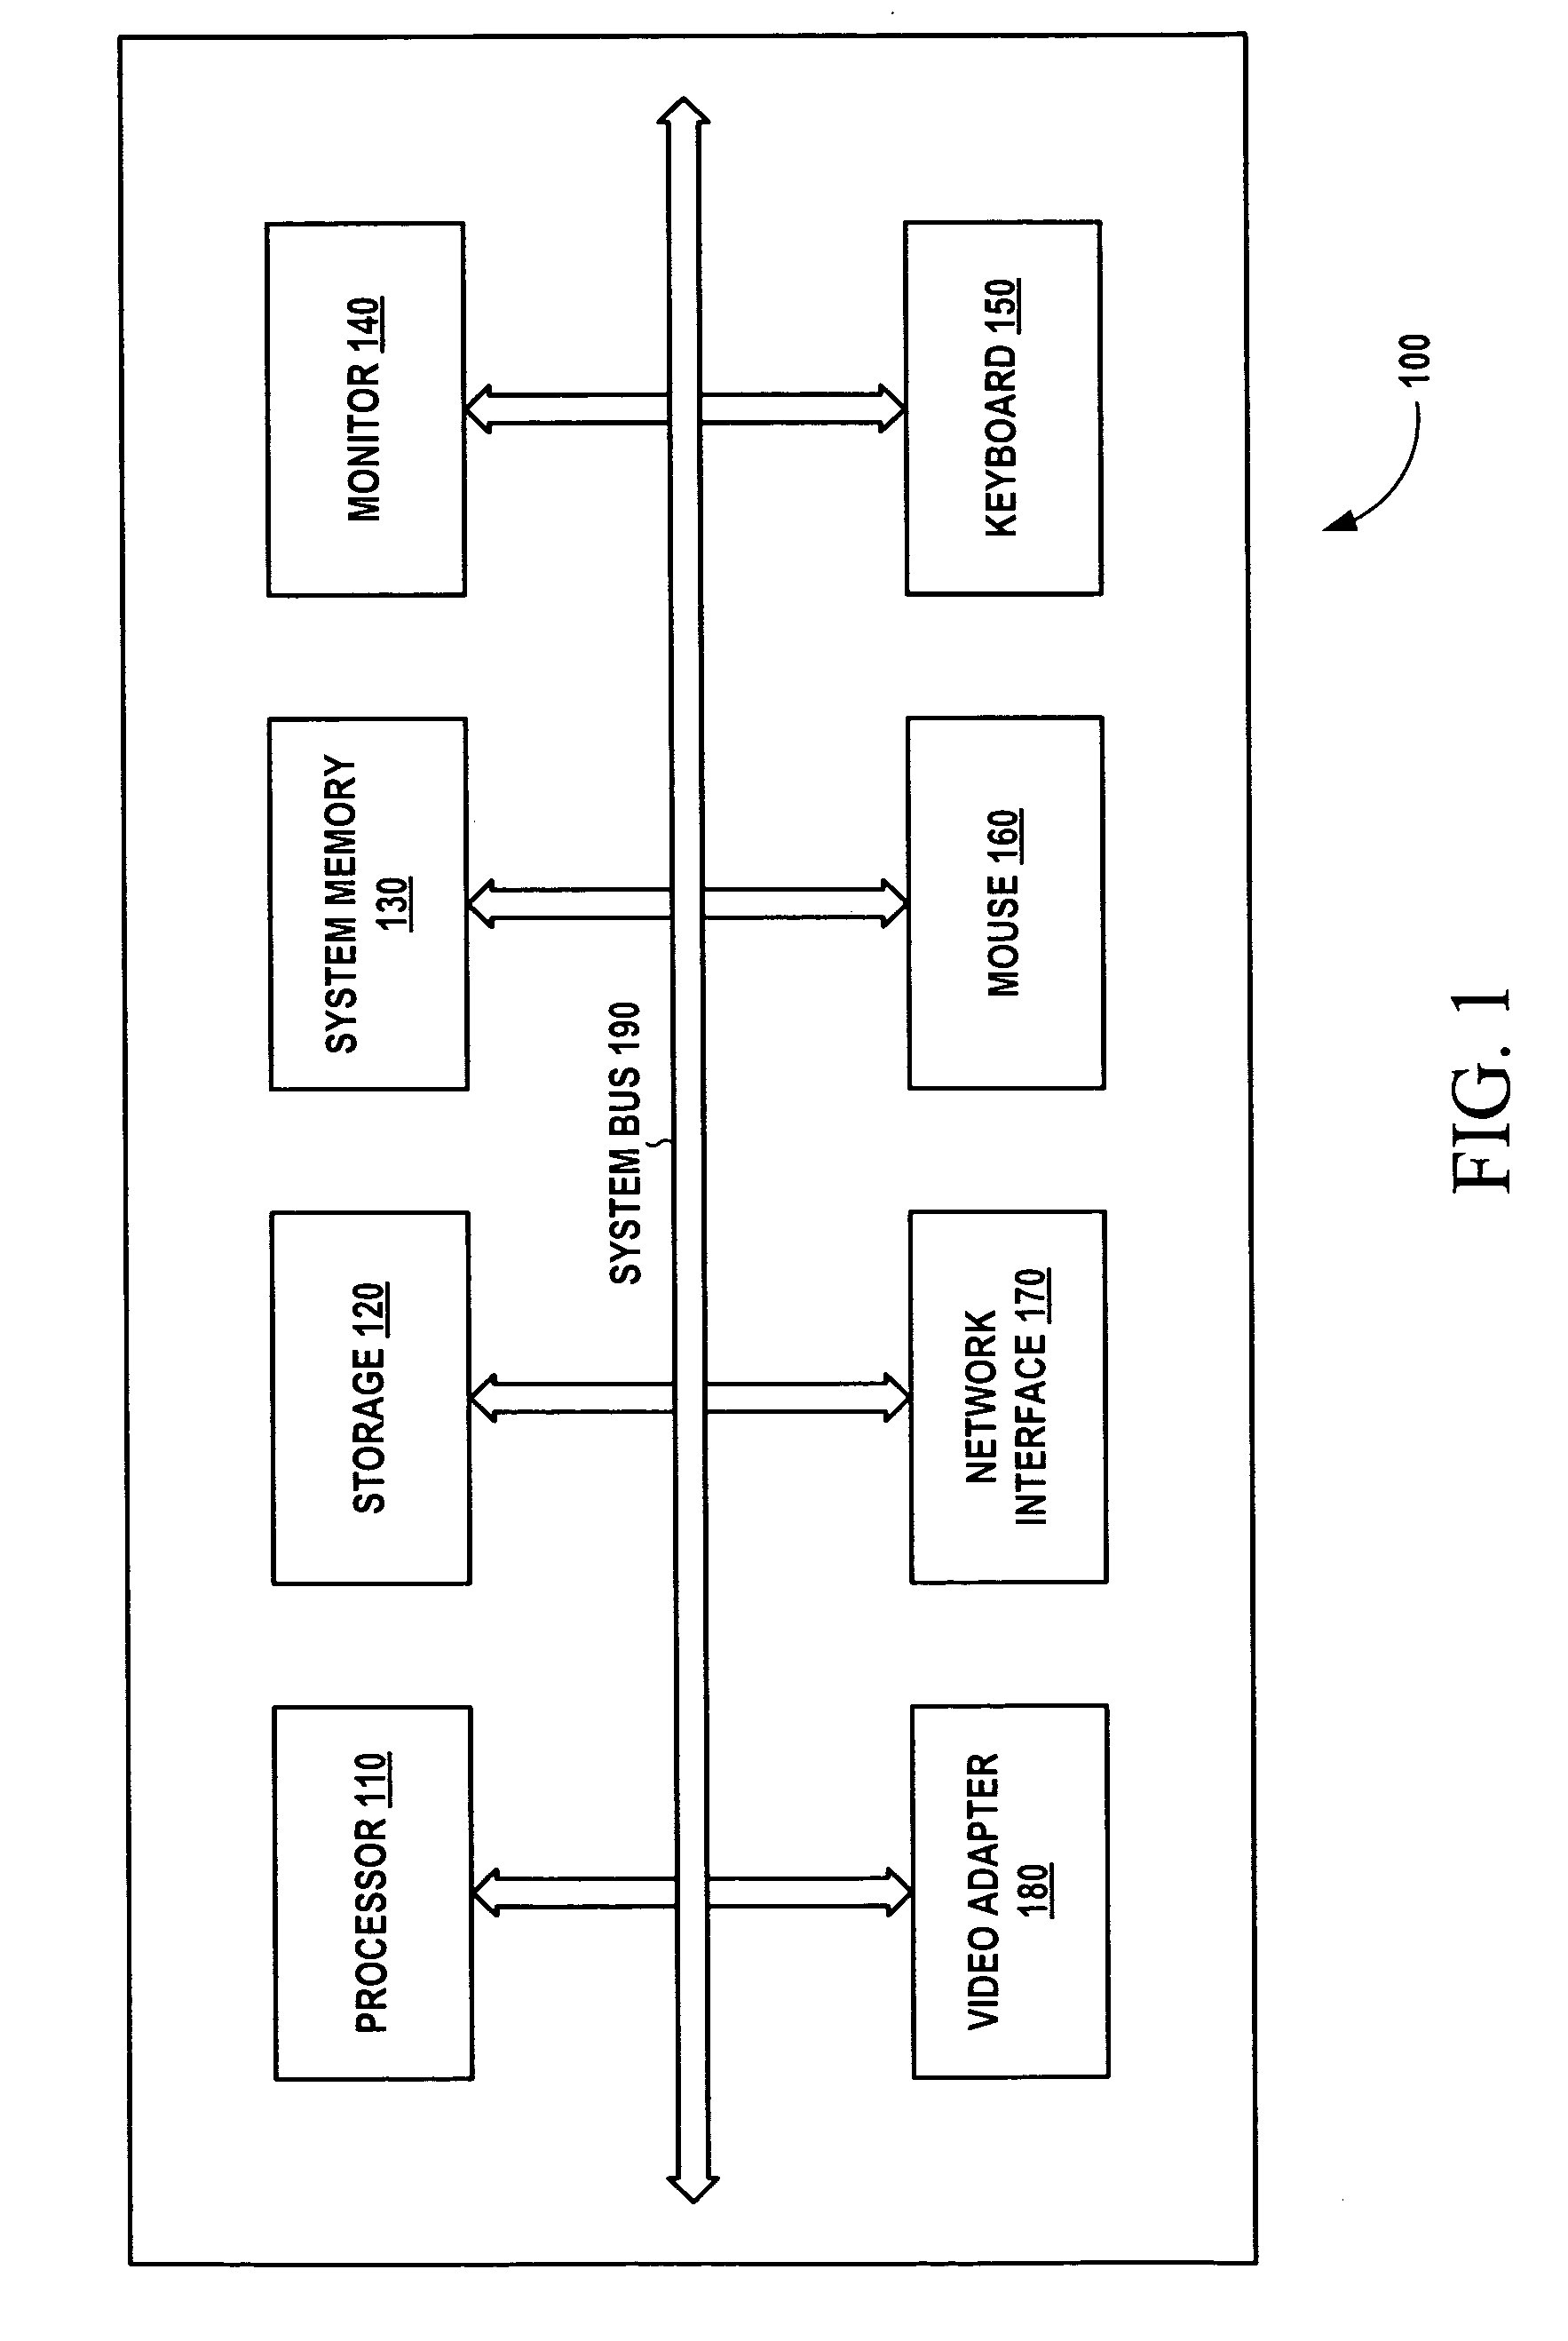 Method And System For Attention-Free User Input On A Computing Device